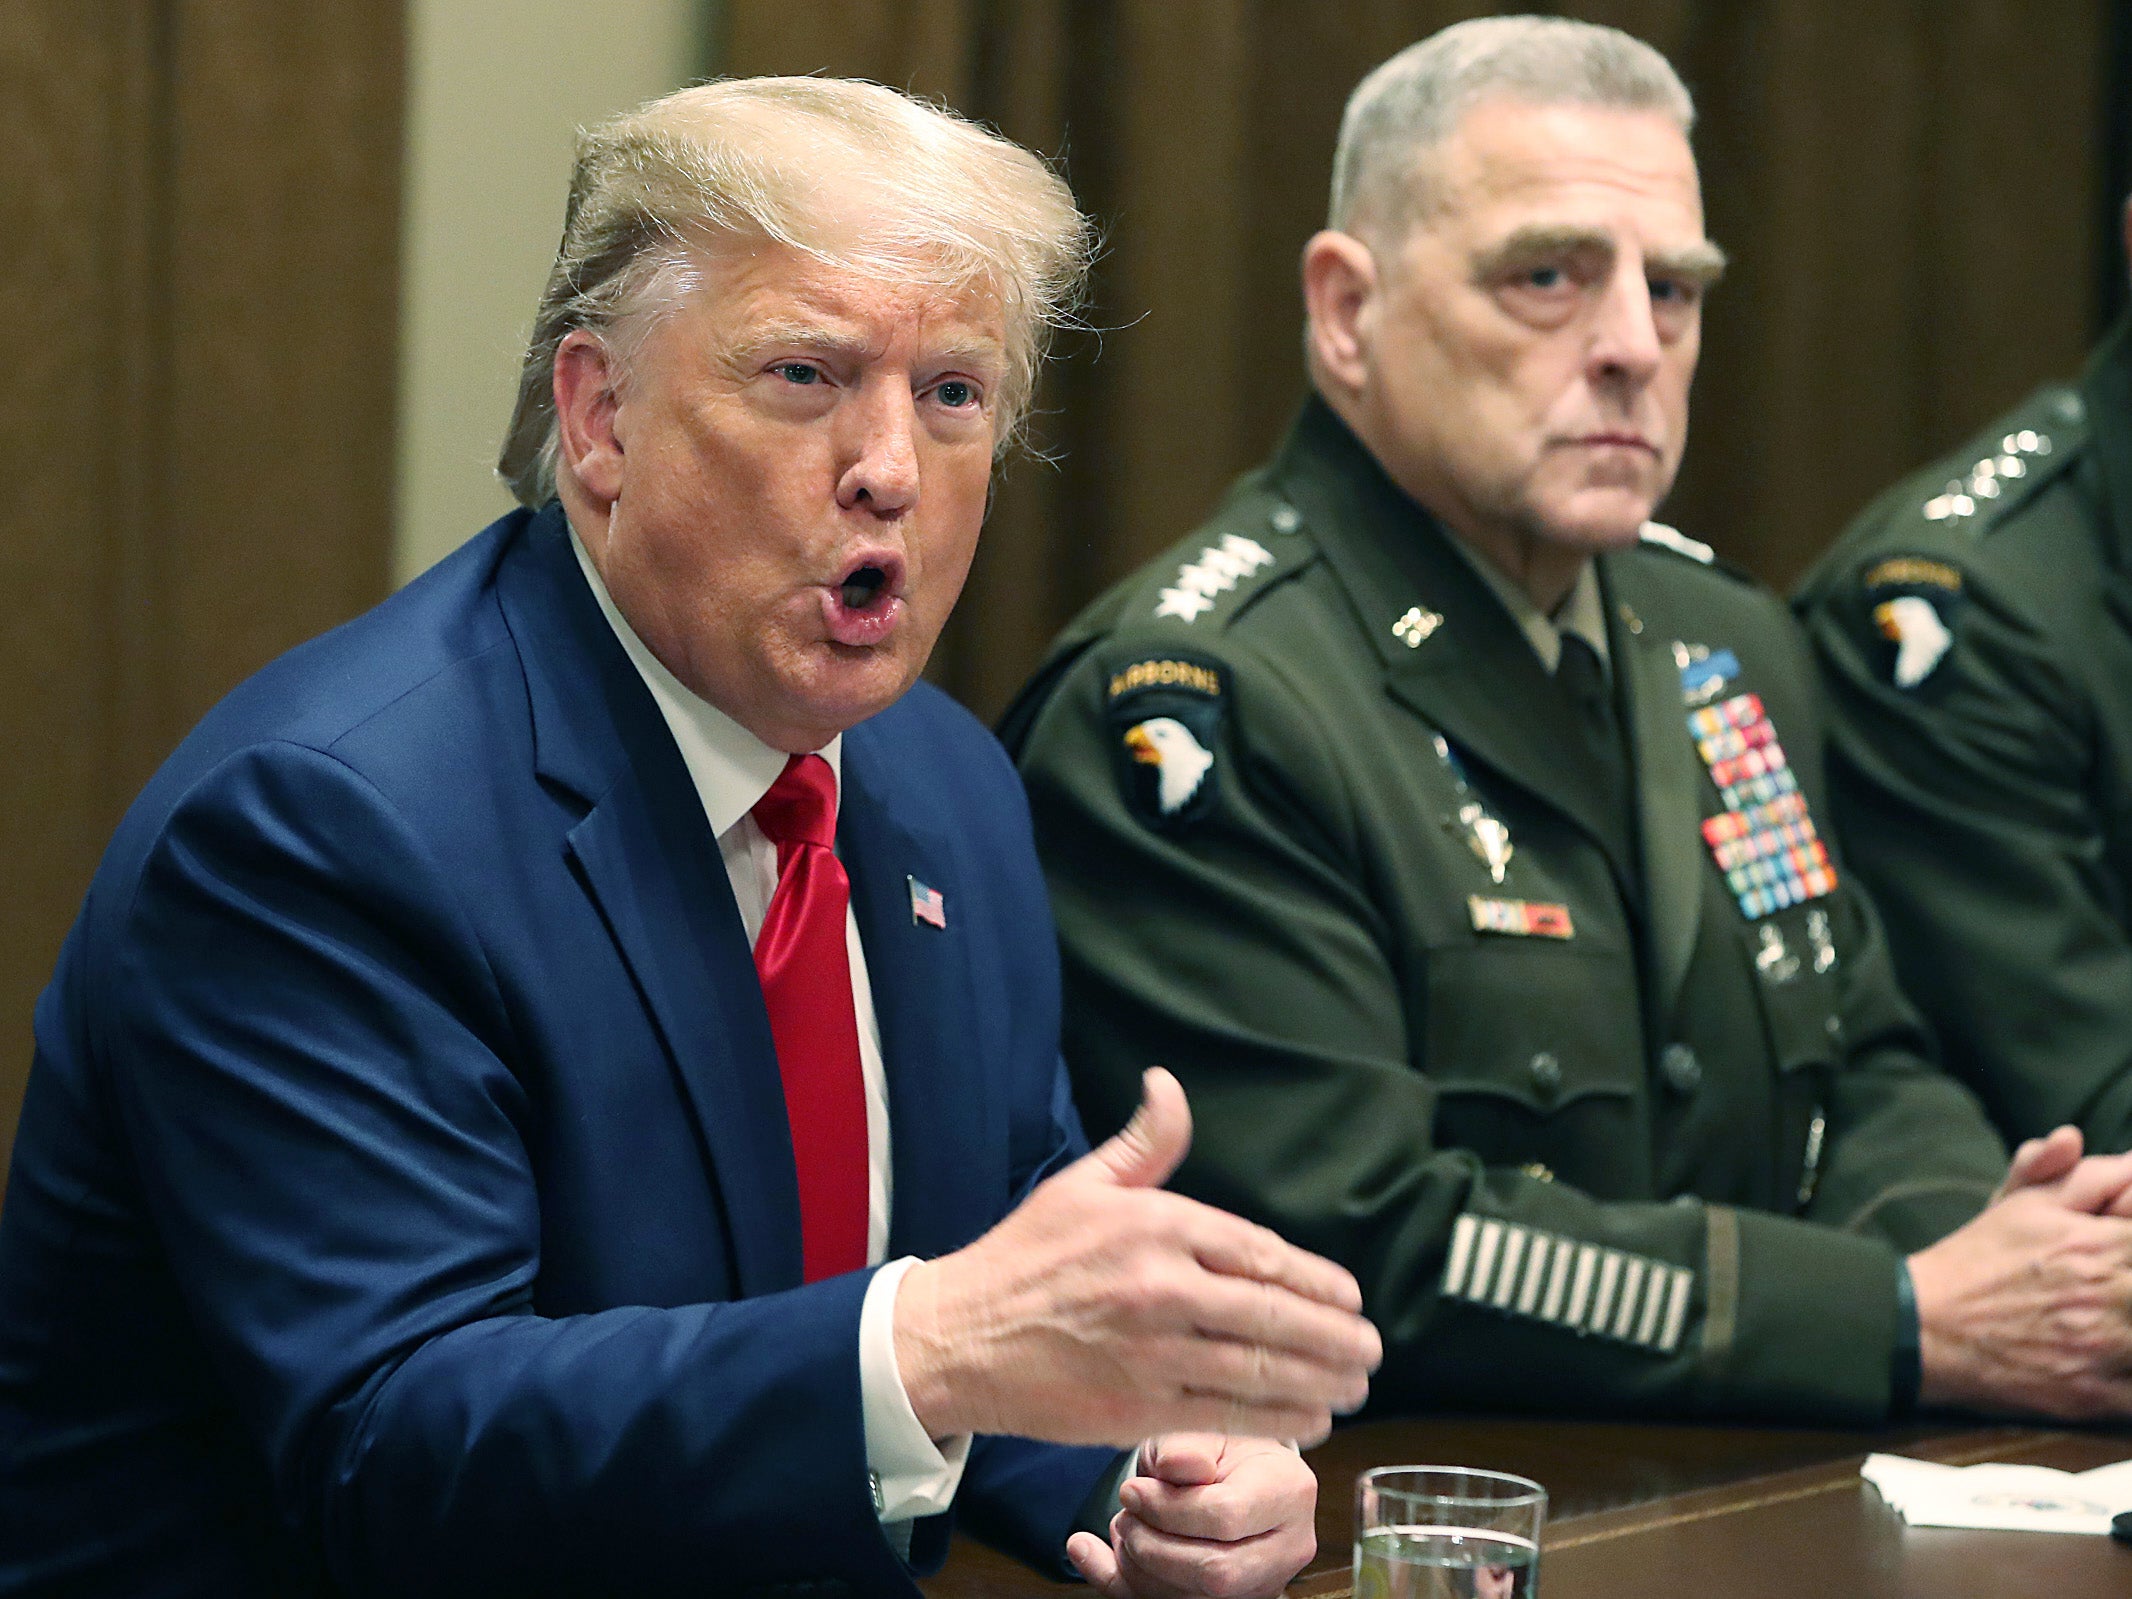 U.S. President Donald Trump speaks as Joint Chiefs of Staff Chairman, Army General Mark Milley looks on after a briefing from senior military leaders in the Cabinet Room at the White House on October 7, 2019 in Washington, DC.